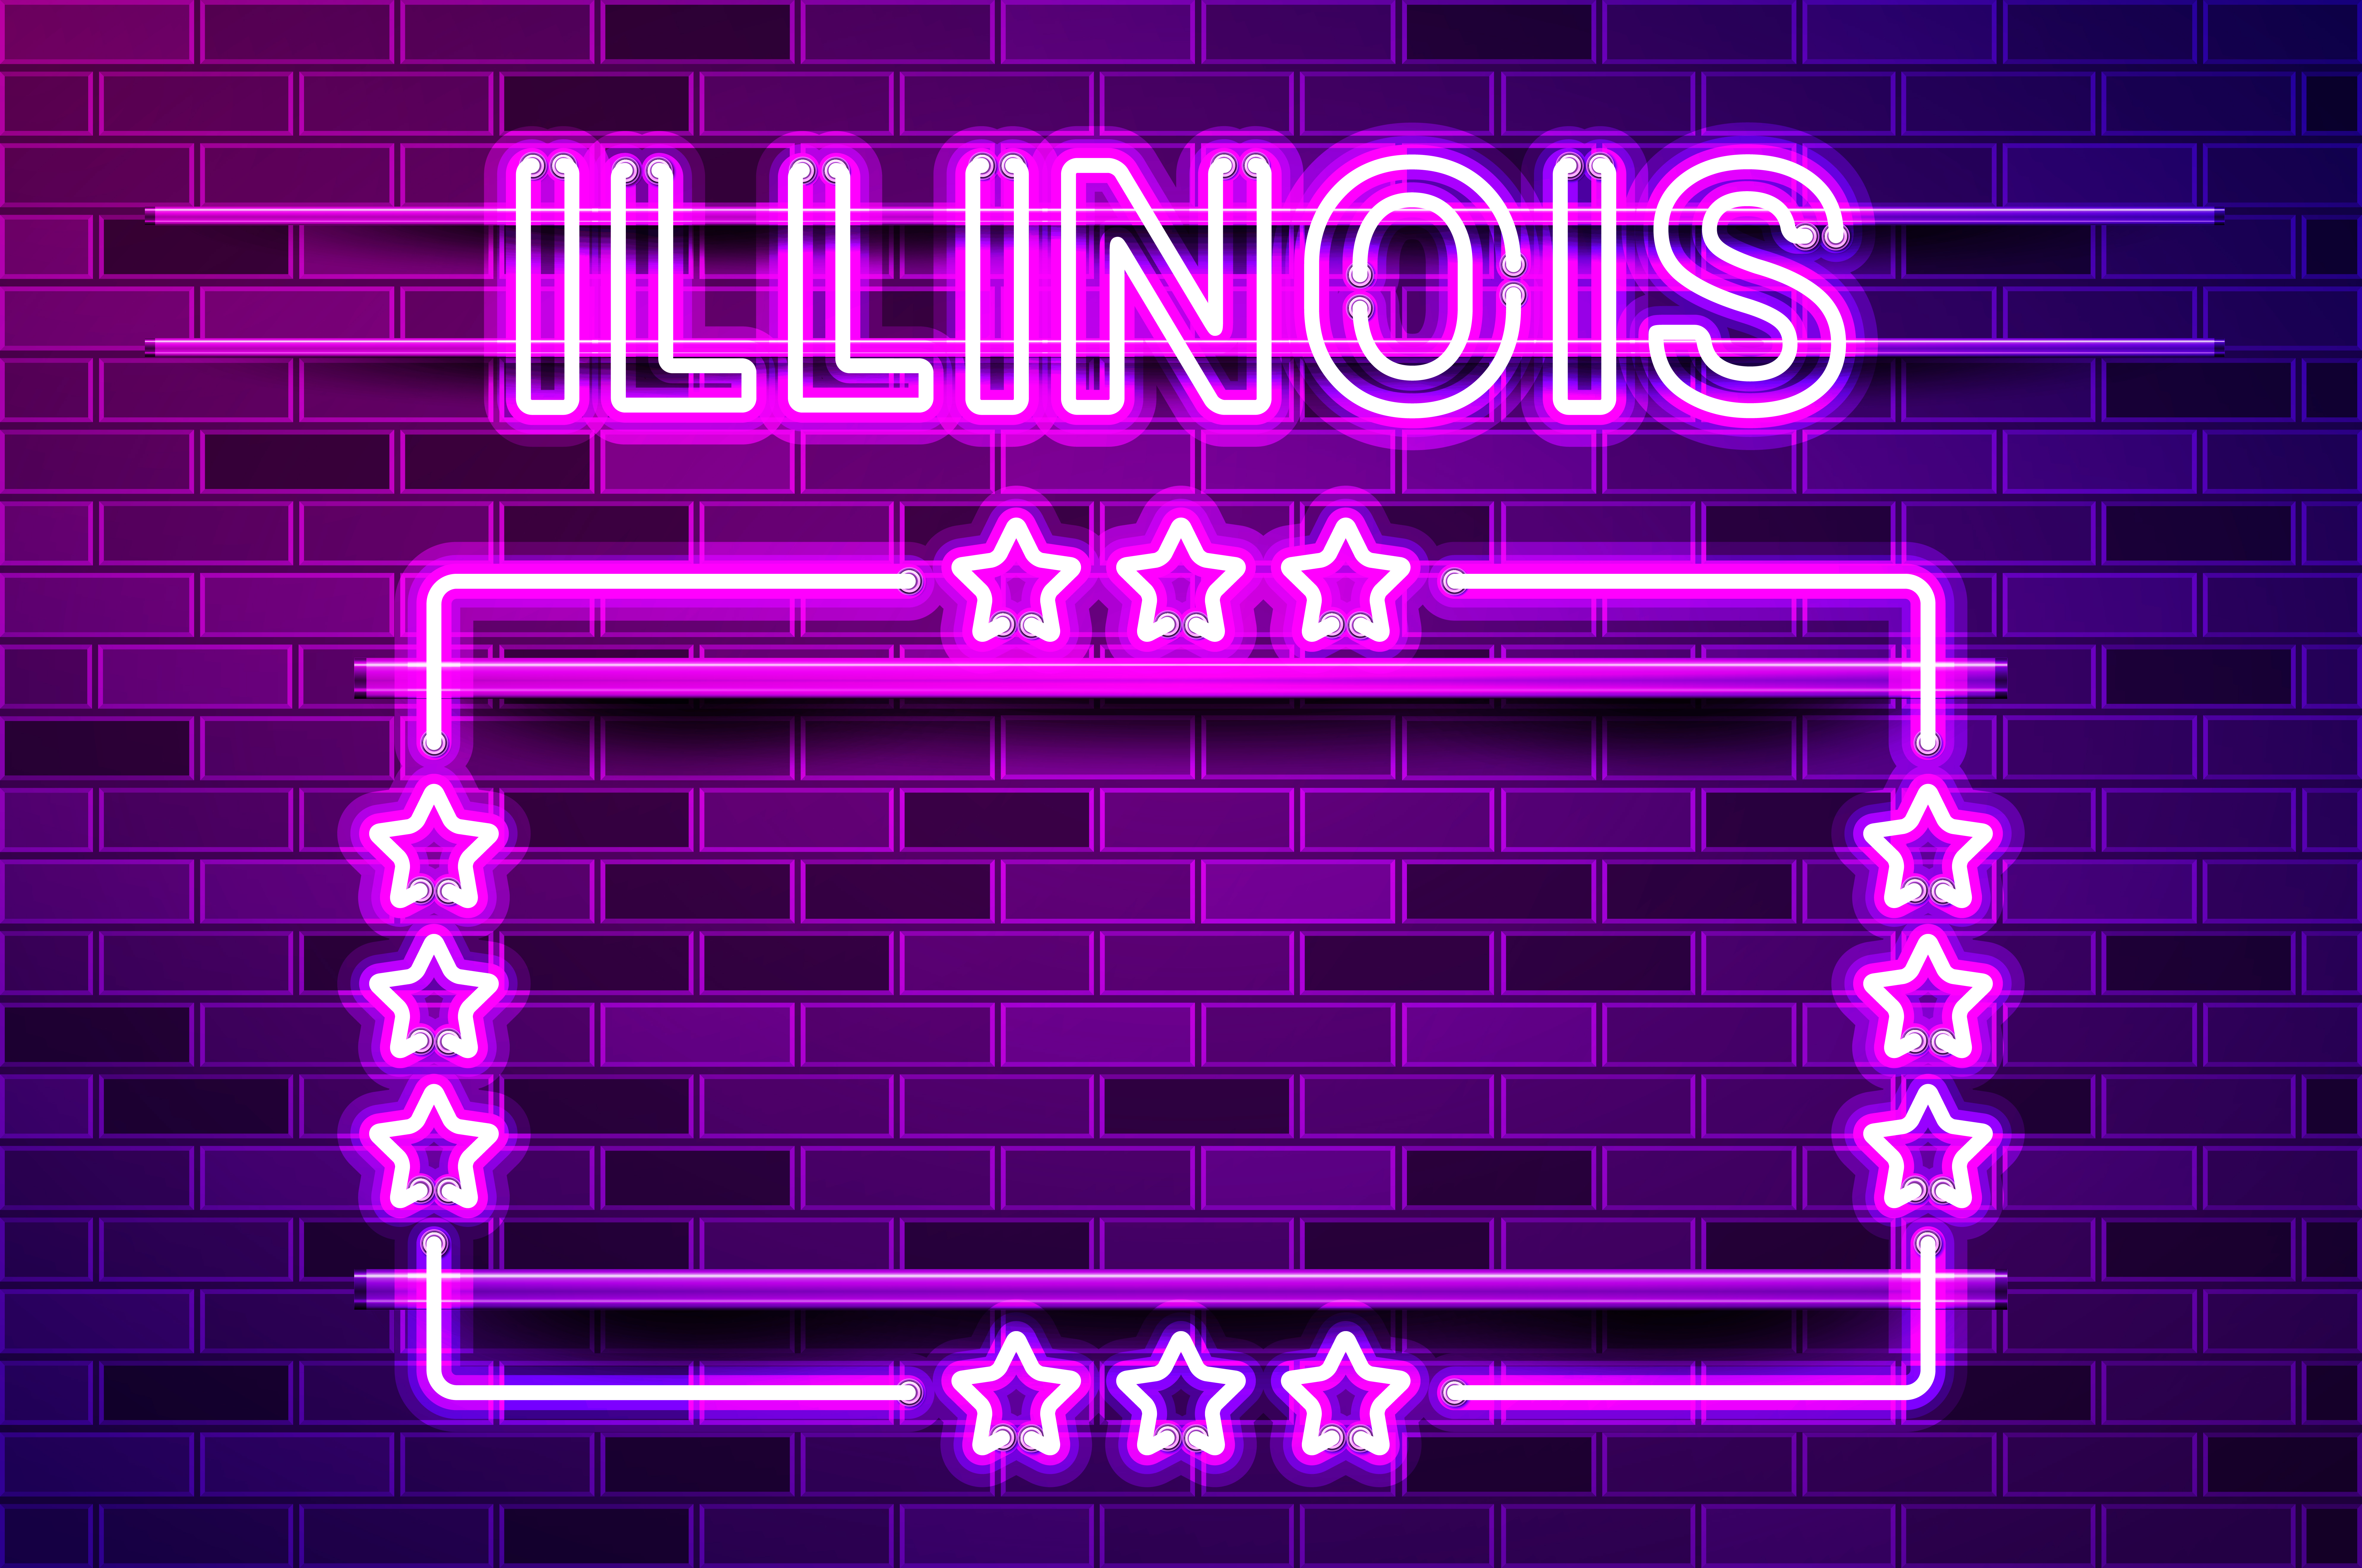 Illinois US State glowing purple neon lettering and a rectangular frame with stars. Realistic vector illustration. Purple brick wall, violet glow, metal holders.. Illinois US State glowing purple neon lettering and a rectangular frame with stars